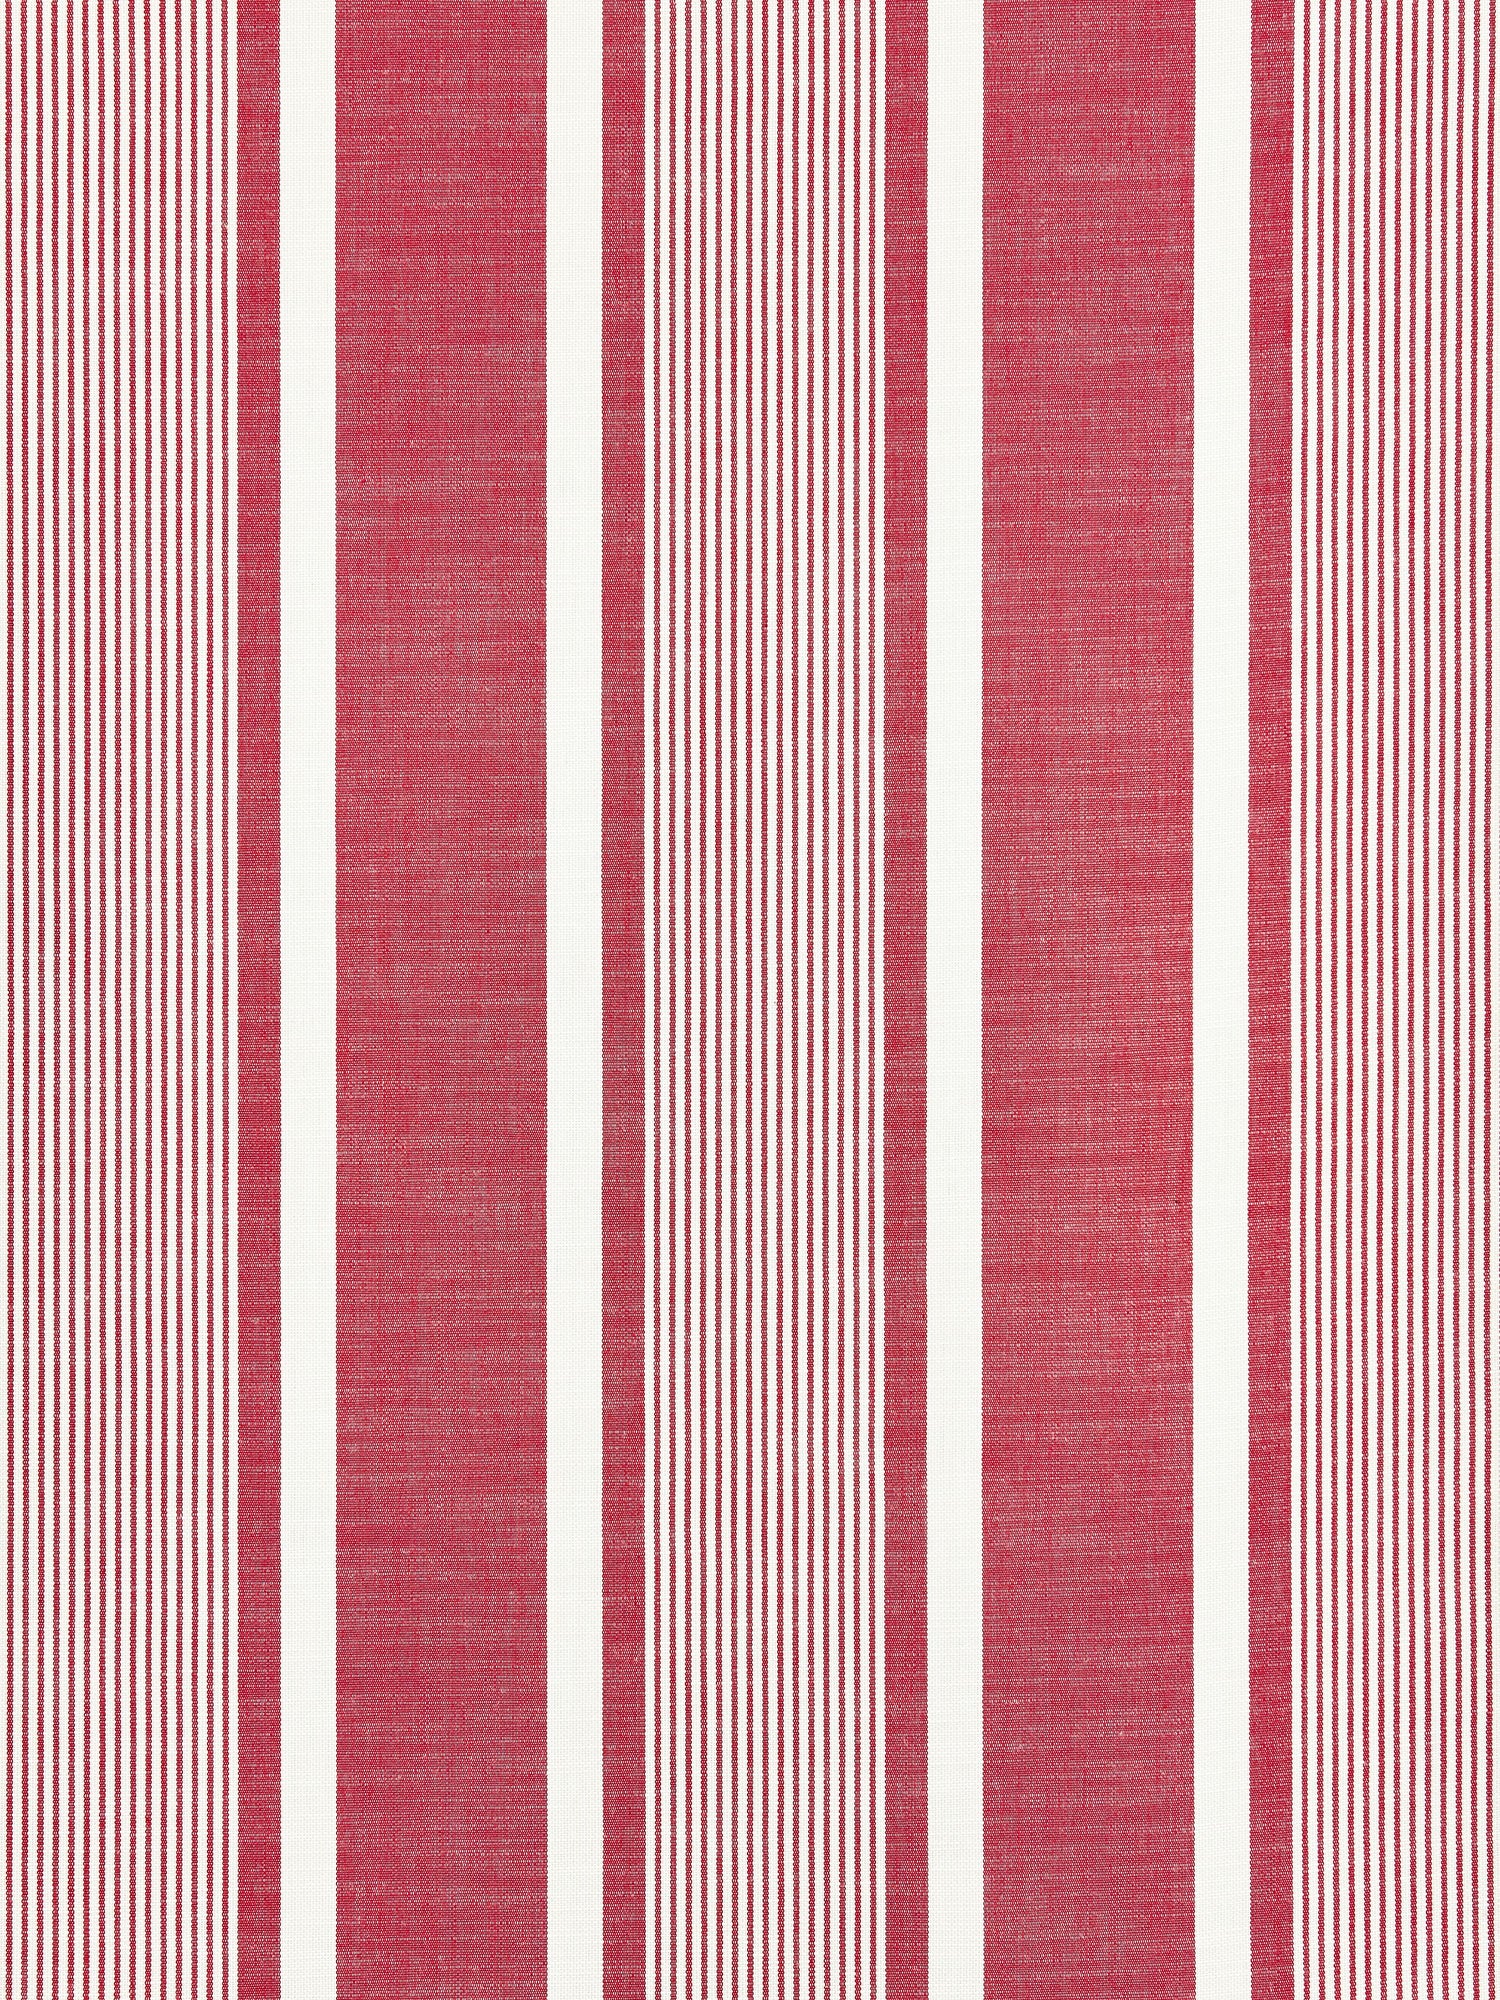 Wellfleet Stripe fabric in berry color - pattern number SC 000327111 - by Scalamandre in the Scalamandre Fabrics Book 1 collection